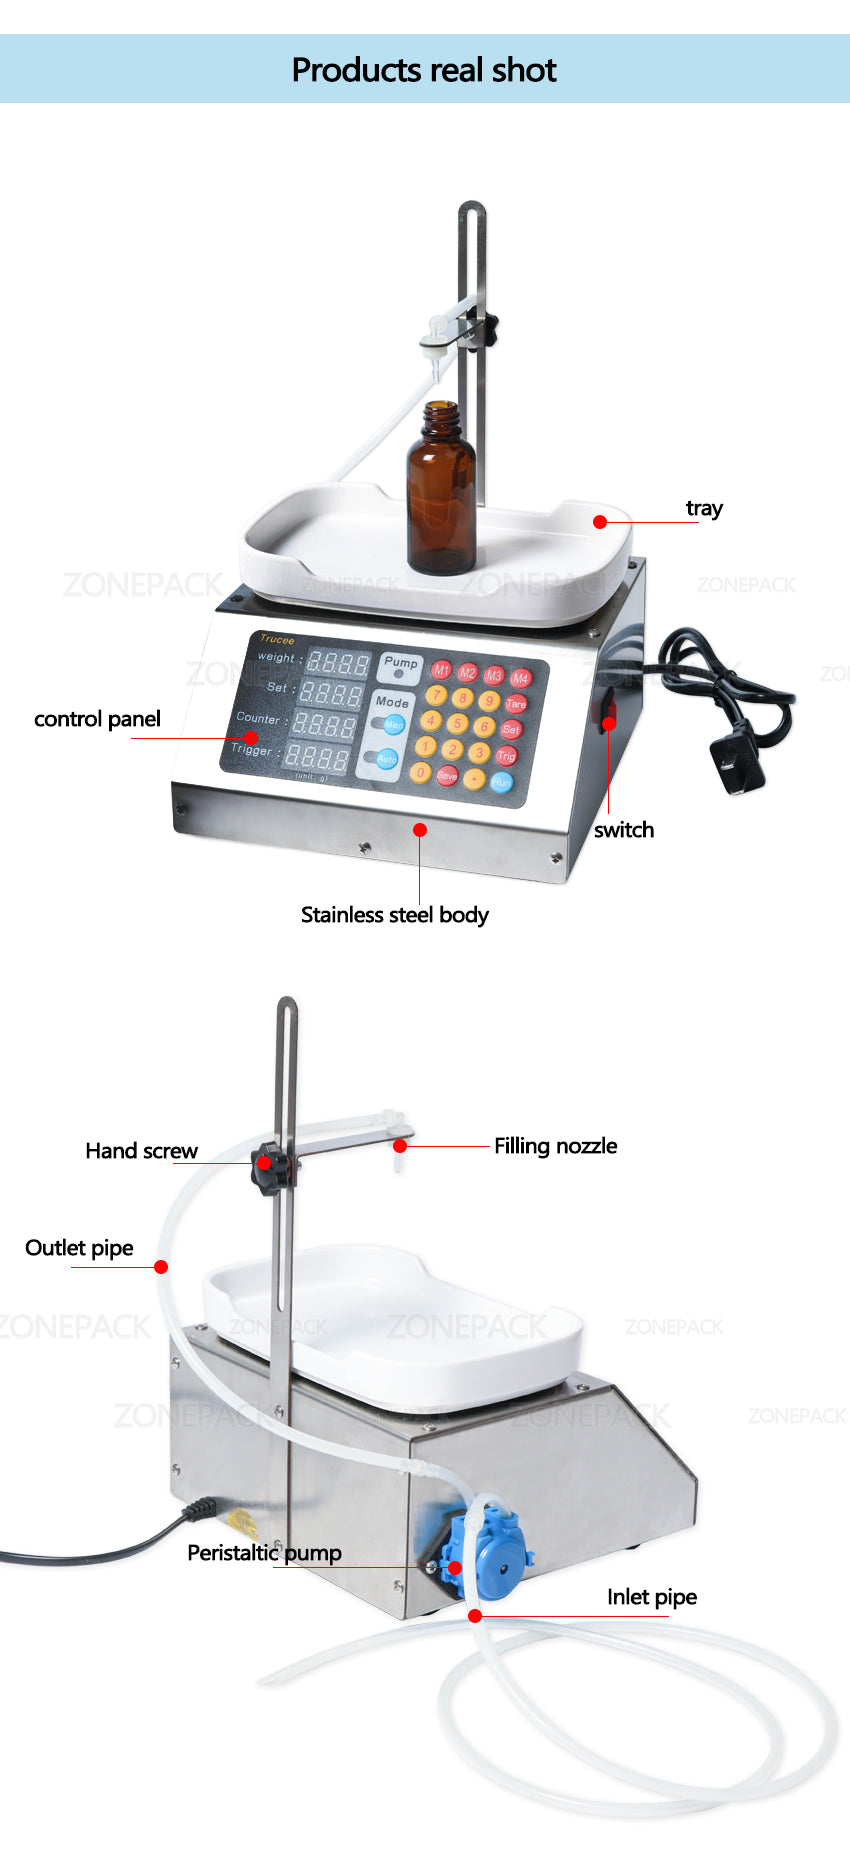 ZS-M90 0-50ml Small Automatic CNC Liquid Weighing Filling Machine